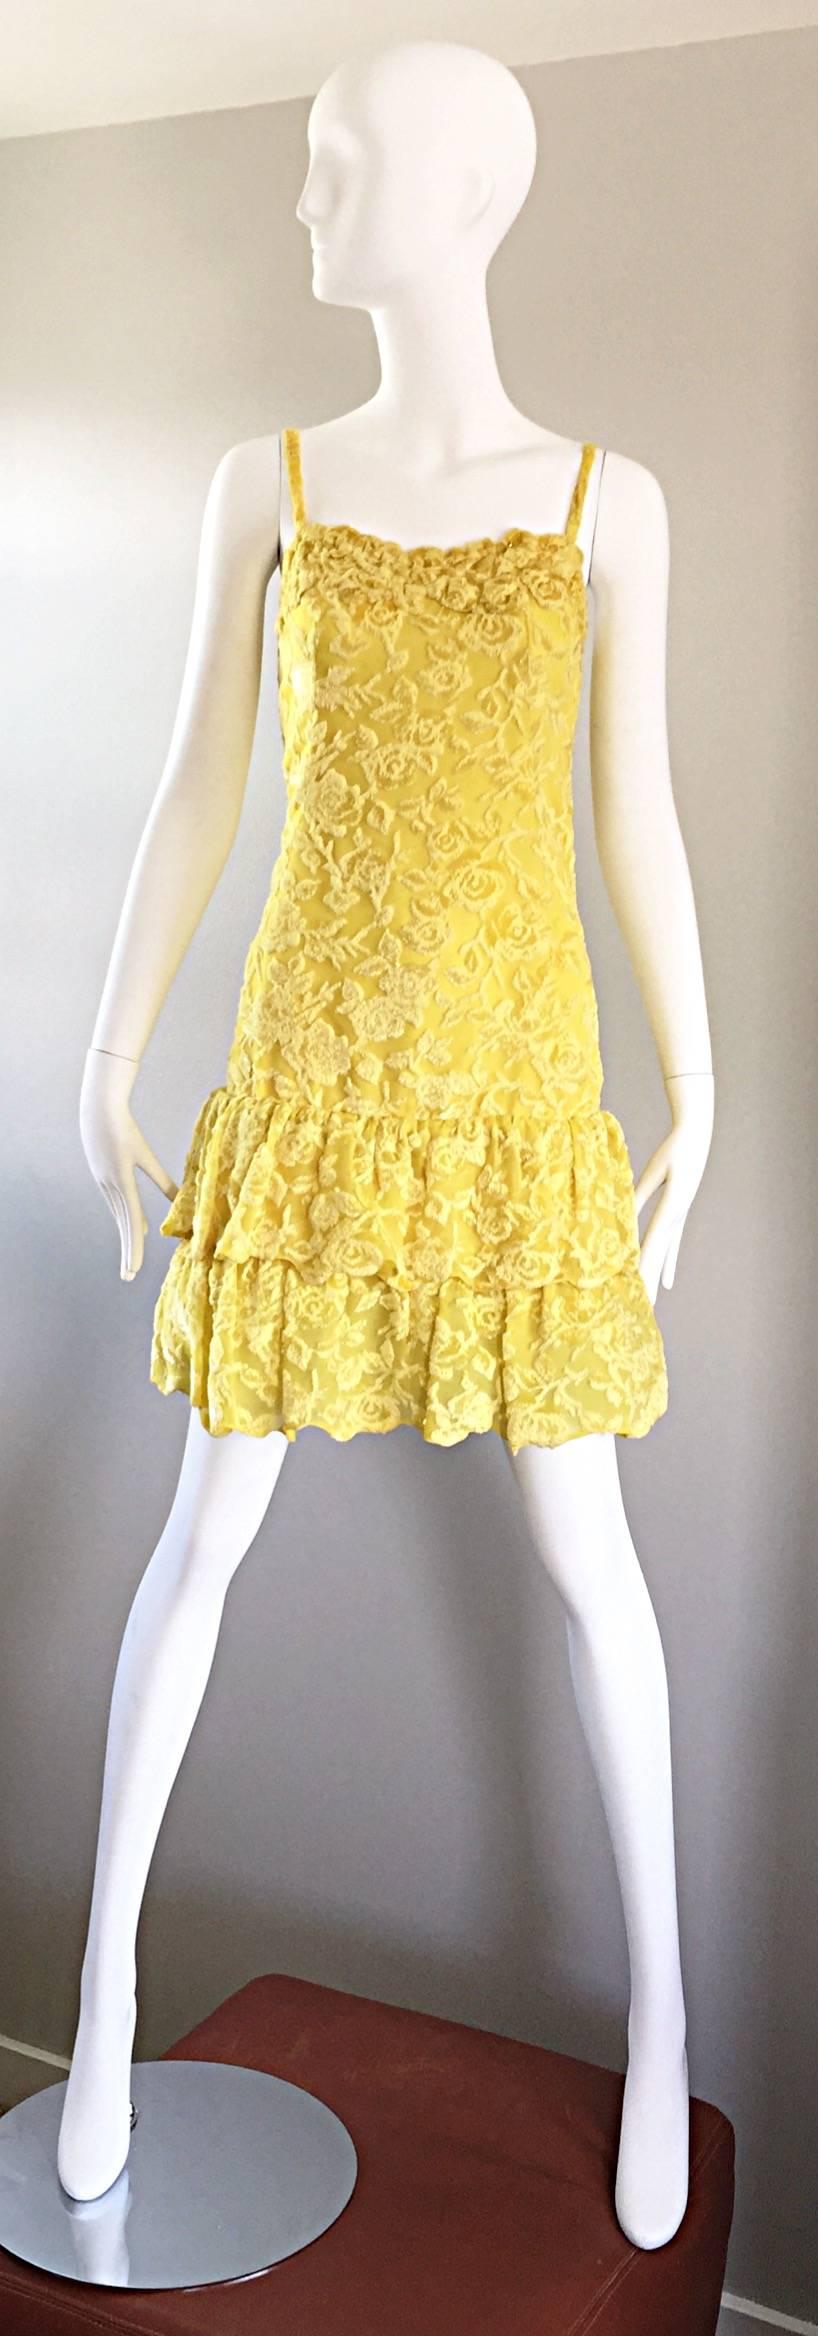 Amazing vintage JAMES GALANOS vintage canary yellow dress AND blouse / jacket! Features silk velvet burn out throughout. Drop waist dress, with a fitted bodice, and two layers of Ruffles at the hem. Long sleeve lightweight blouse features chic